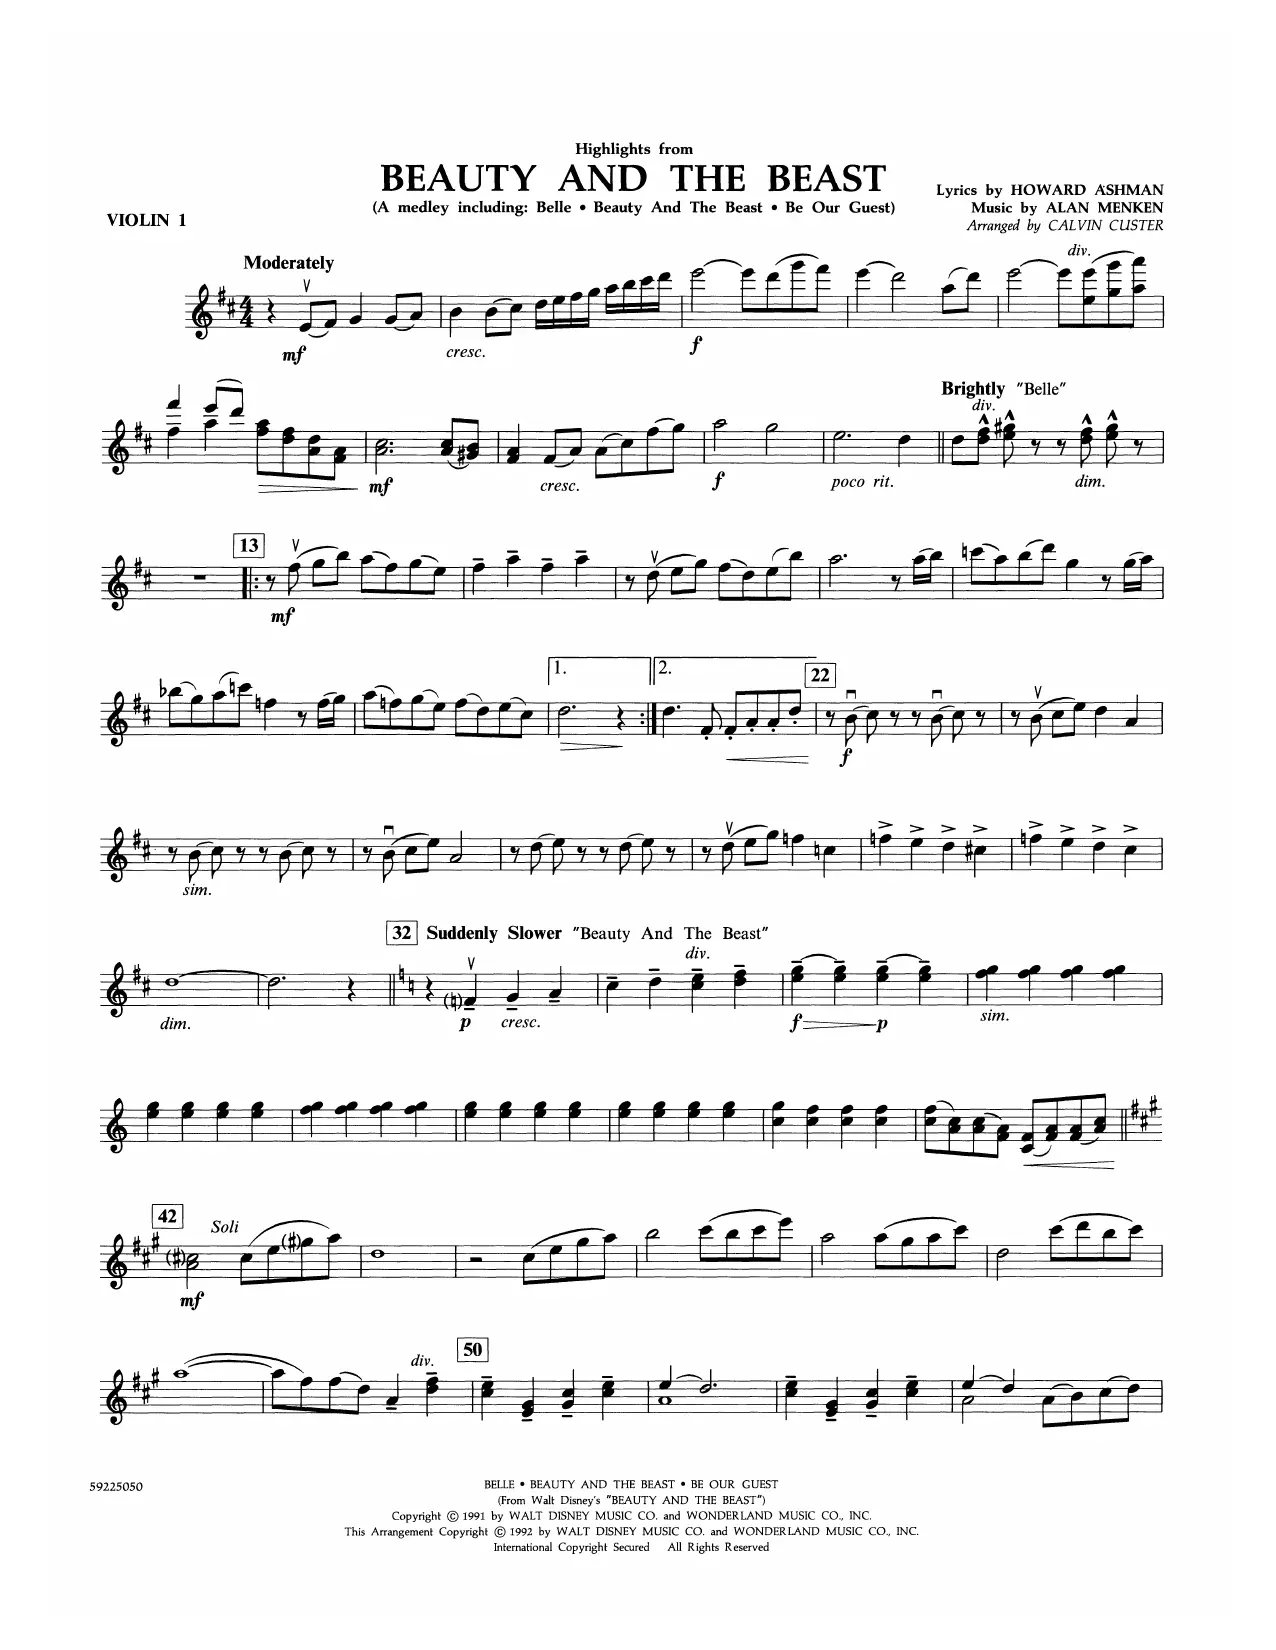 beauty and the beast partitura violin - What instruments are used in the song Beauty and the Beast